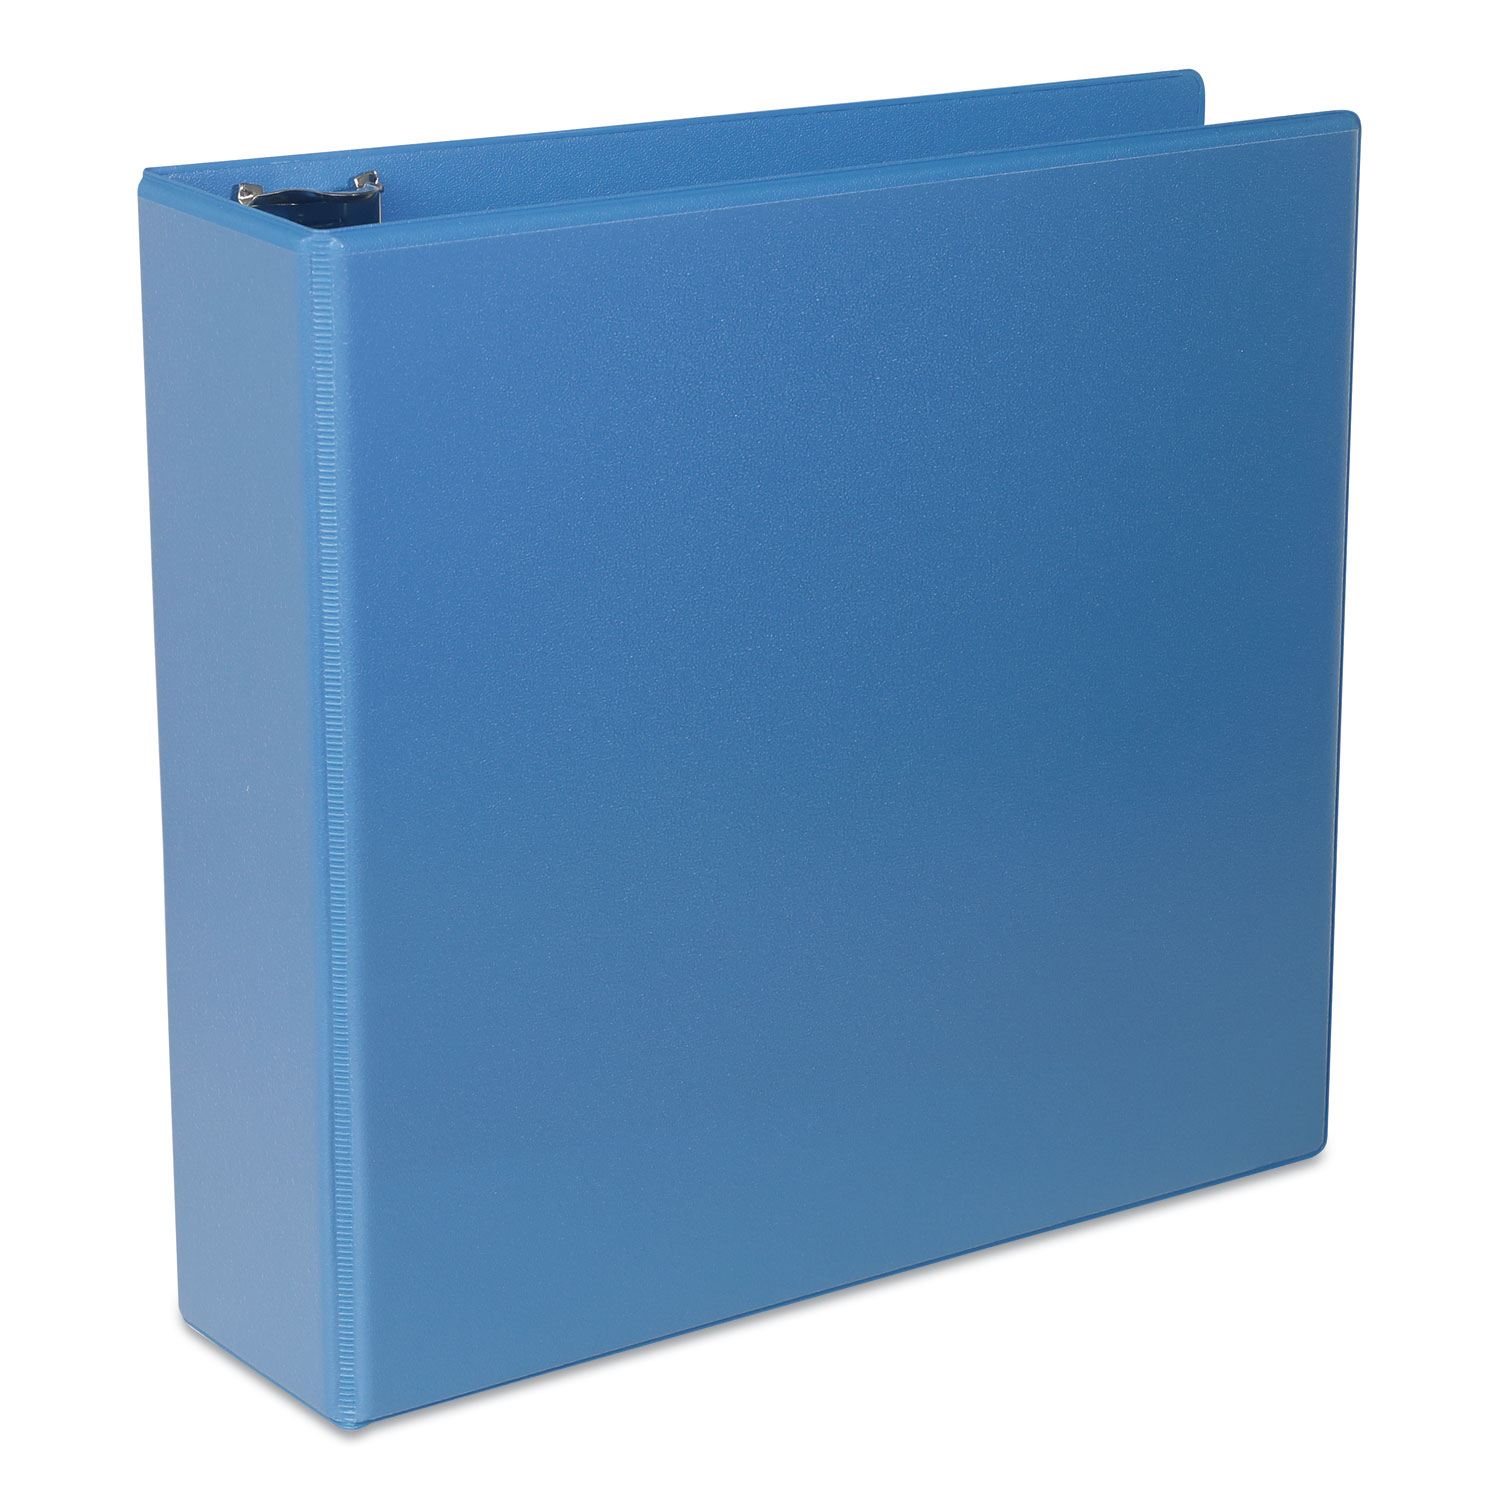  Universal UNV20753 Deluxe Round Ring View Binder, 3 Rings, 3 Capacity, 11 x 8.5, Light Blue (UNV20753) 